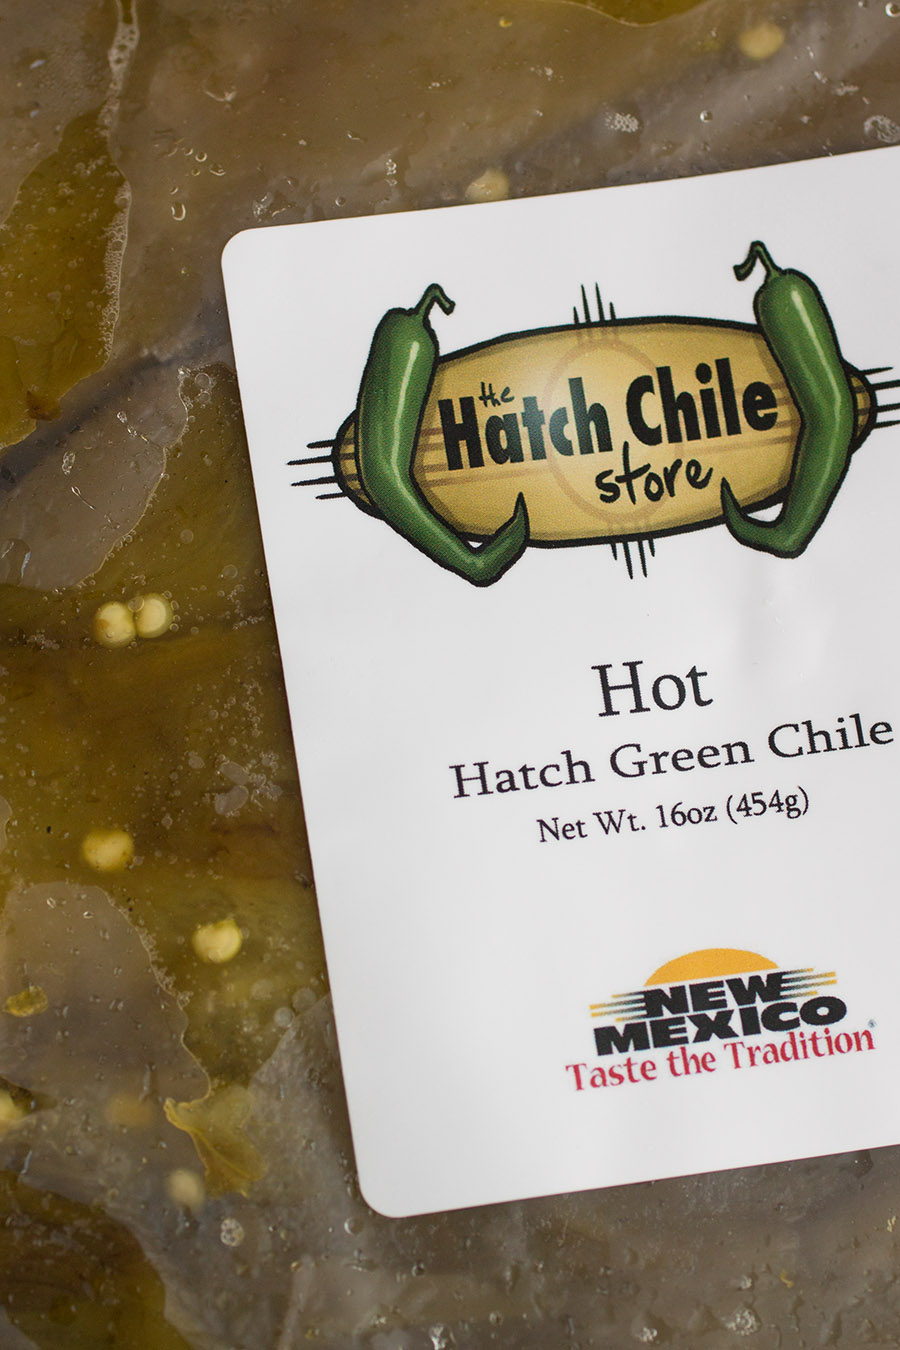 The Hatch Chile store banner